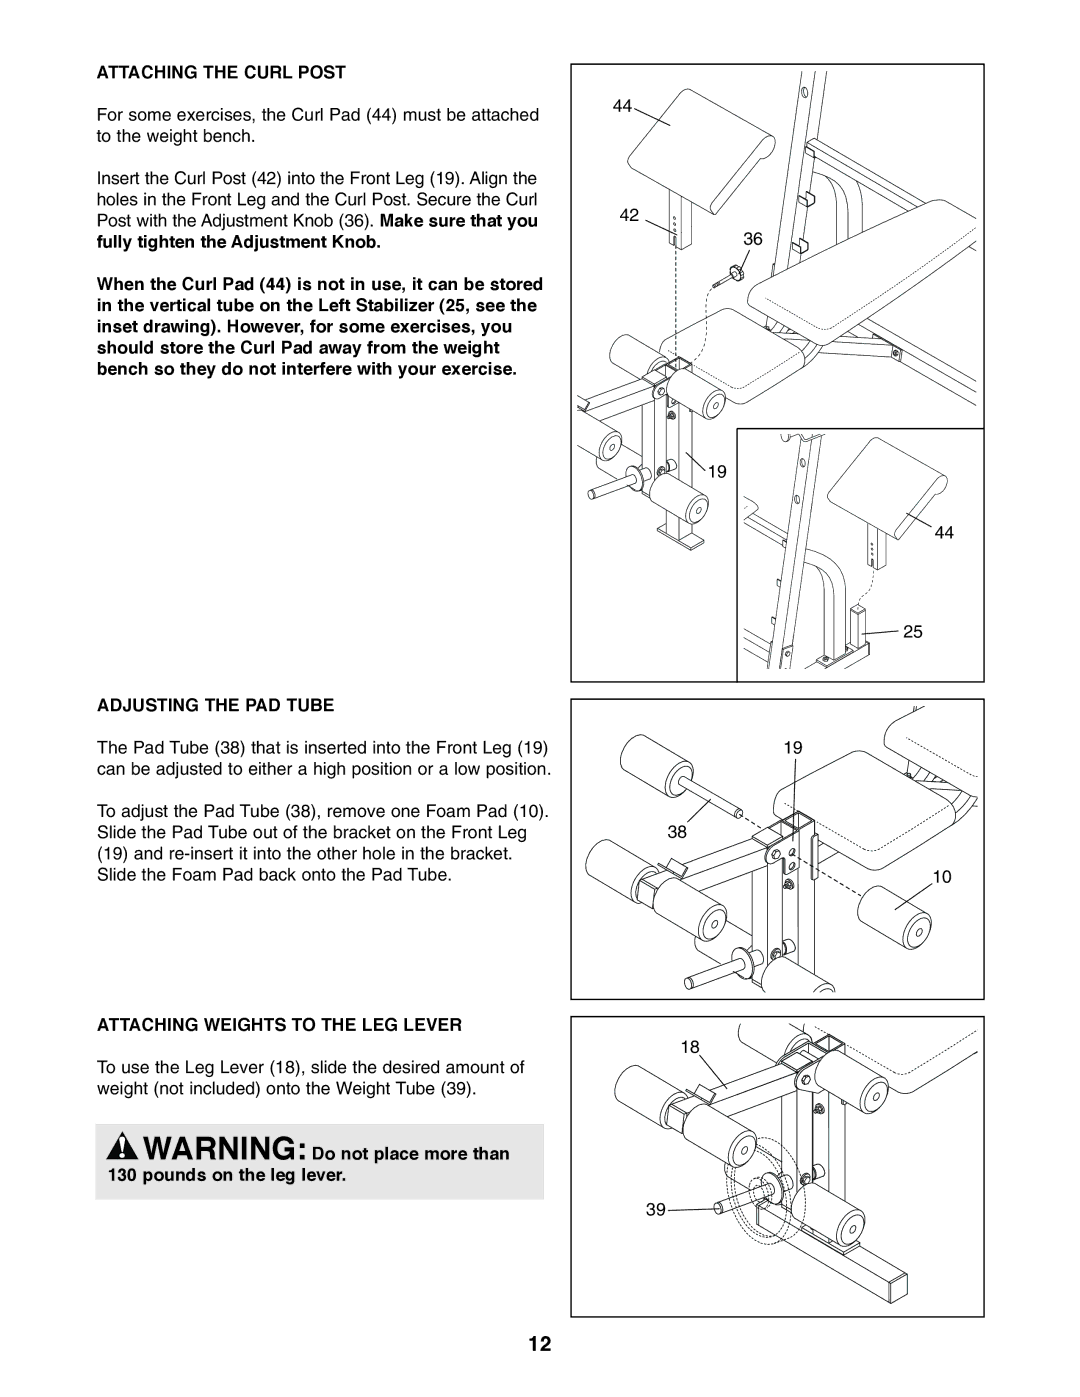 Weider WEBE64410 user manual Attaching the Curl Post, Adjusting the PAD Tube, Attaching Weights to the LEG Lever 